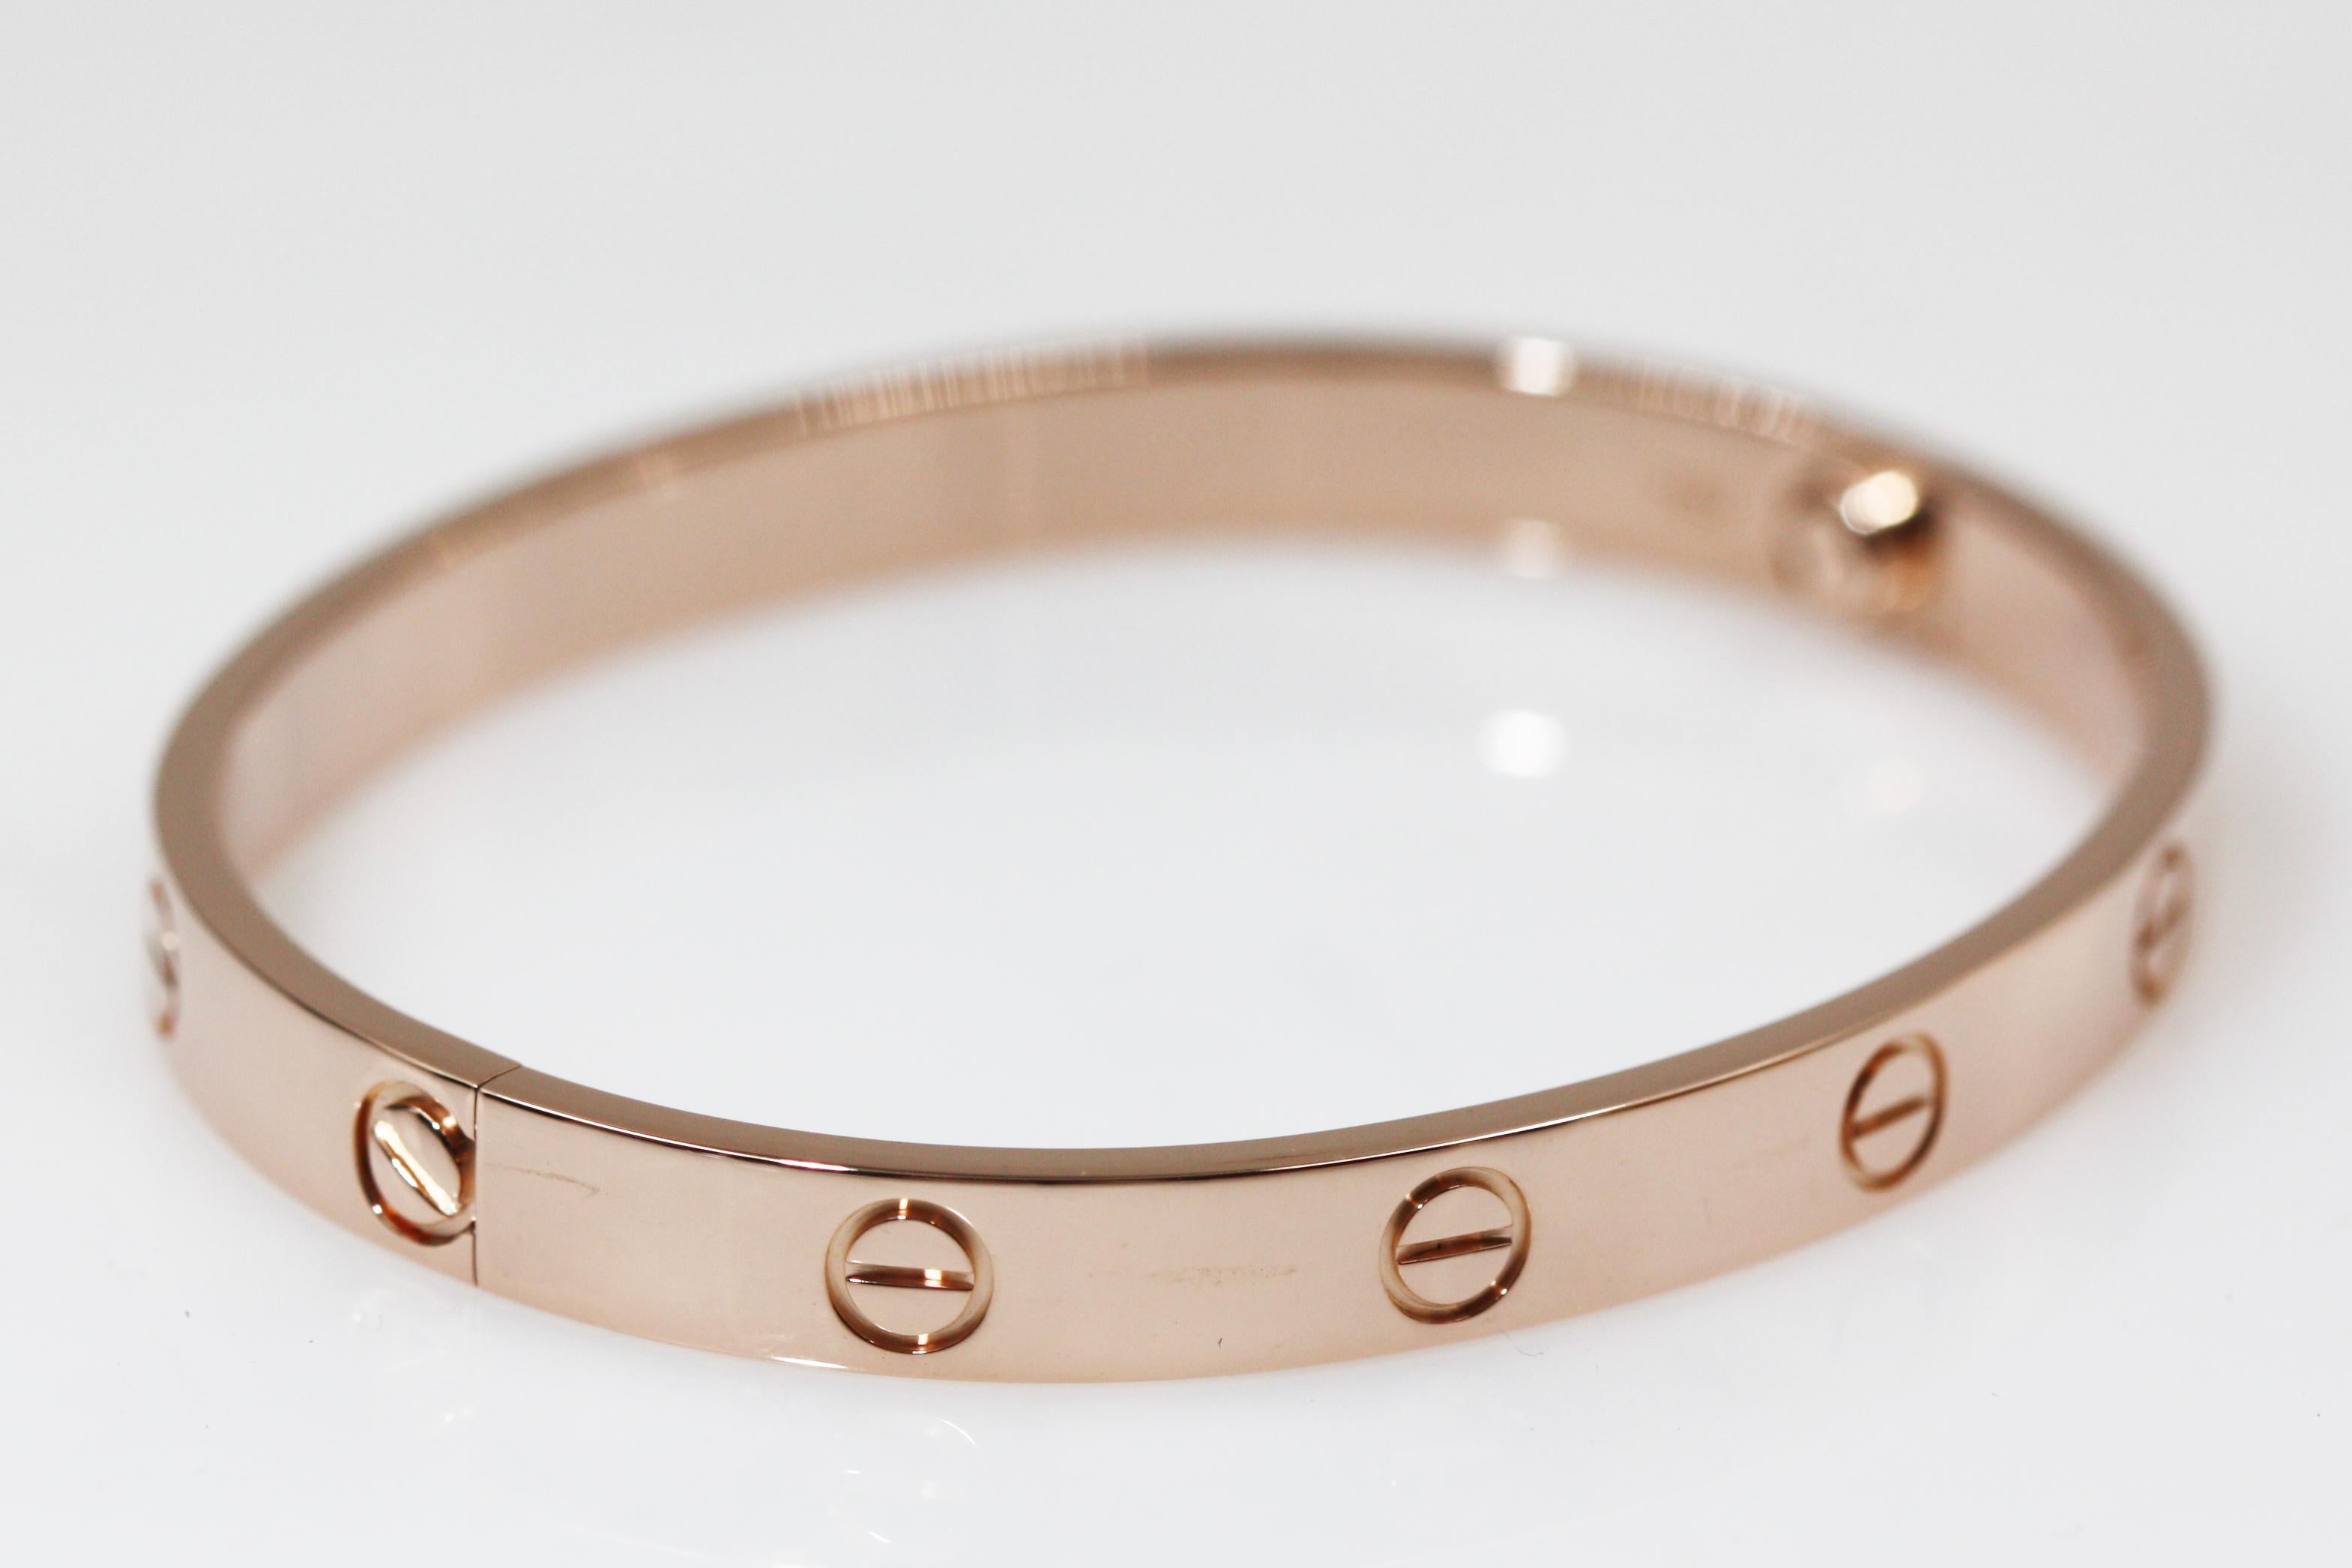 A Beautiful bracelet from Cartier Love collection, made in 18K rose gold. The bracelet have the iconic screw motif. REF: B6035617

Size 18
We have other size available, please feel free to ask.
This item will come with an original box and